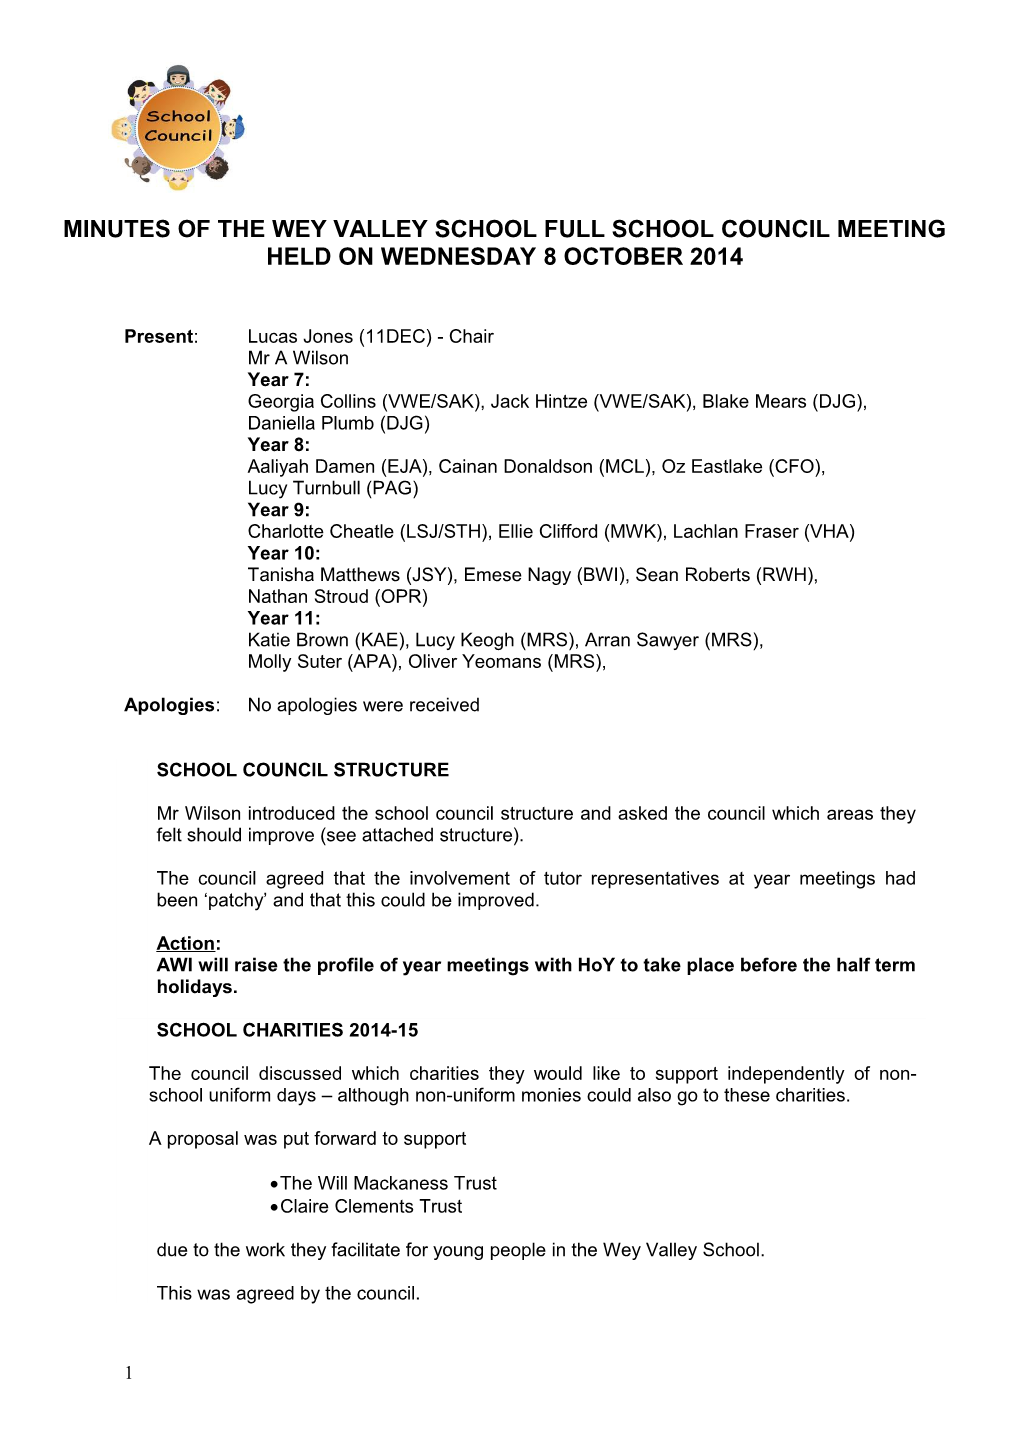 Minutes of the Wey Valley School Full School Council Meeting